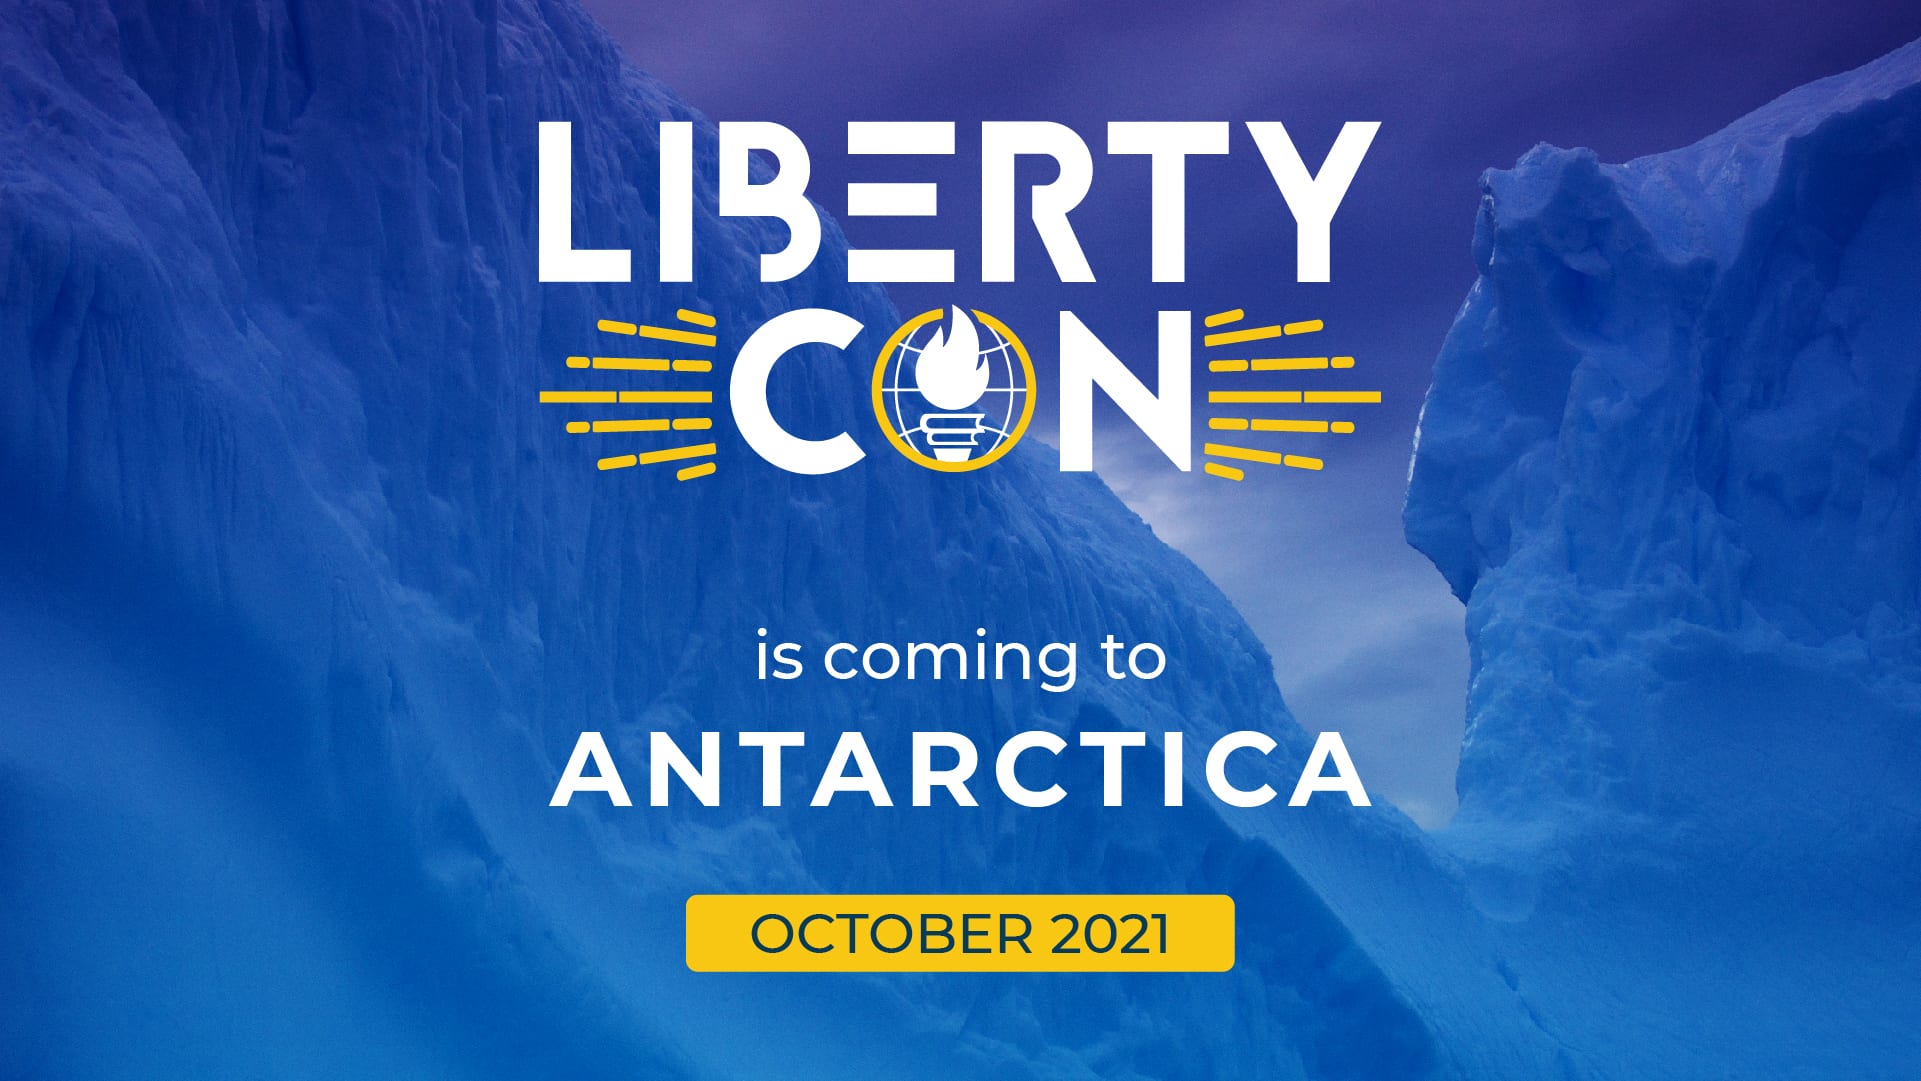 LibertyCon is finally coming to Antarctica in 2021!